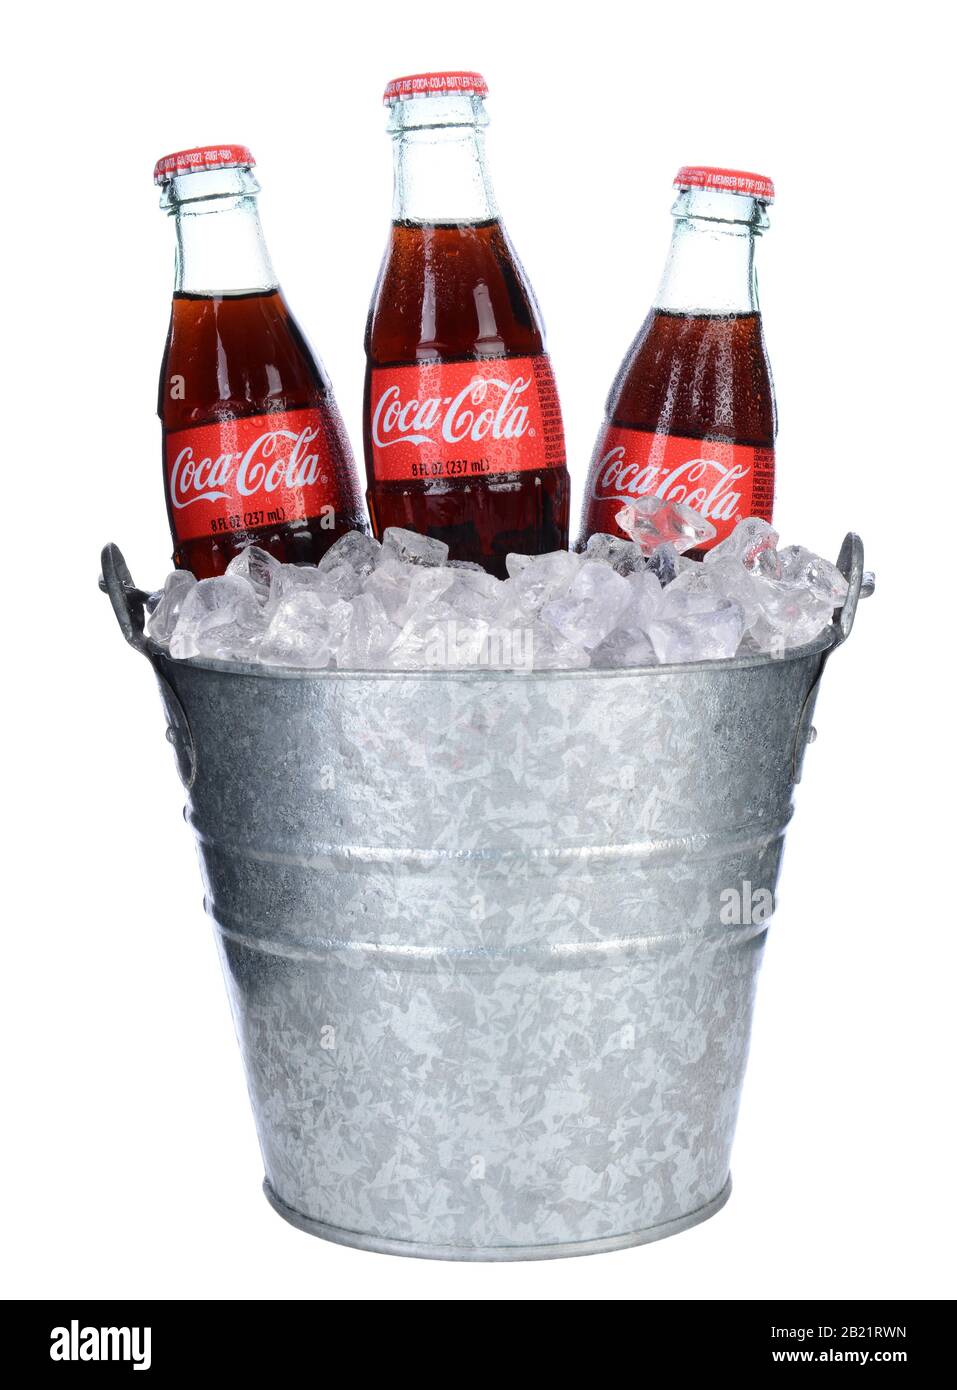 IRVINE, CA - February 06, 2014: Threes bottles of Coca-Cola in and Ice bucket. Coke is one of the most popular soft drinks in the world. Stock Photo